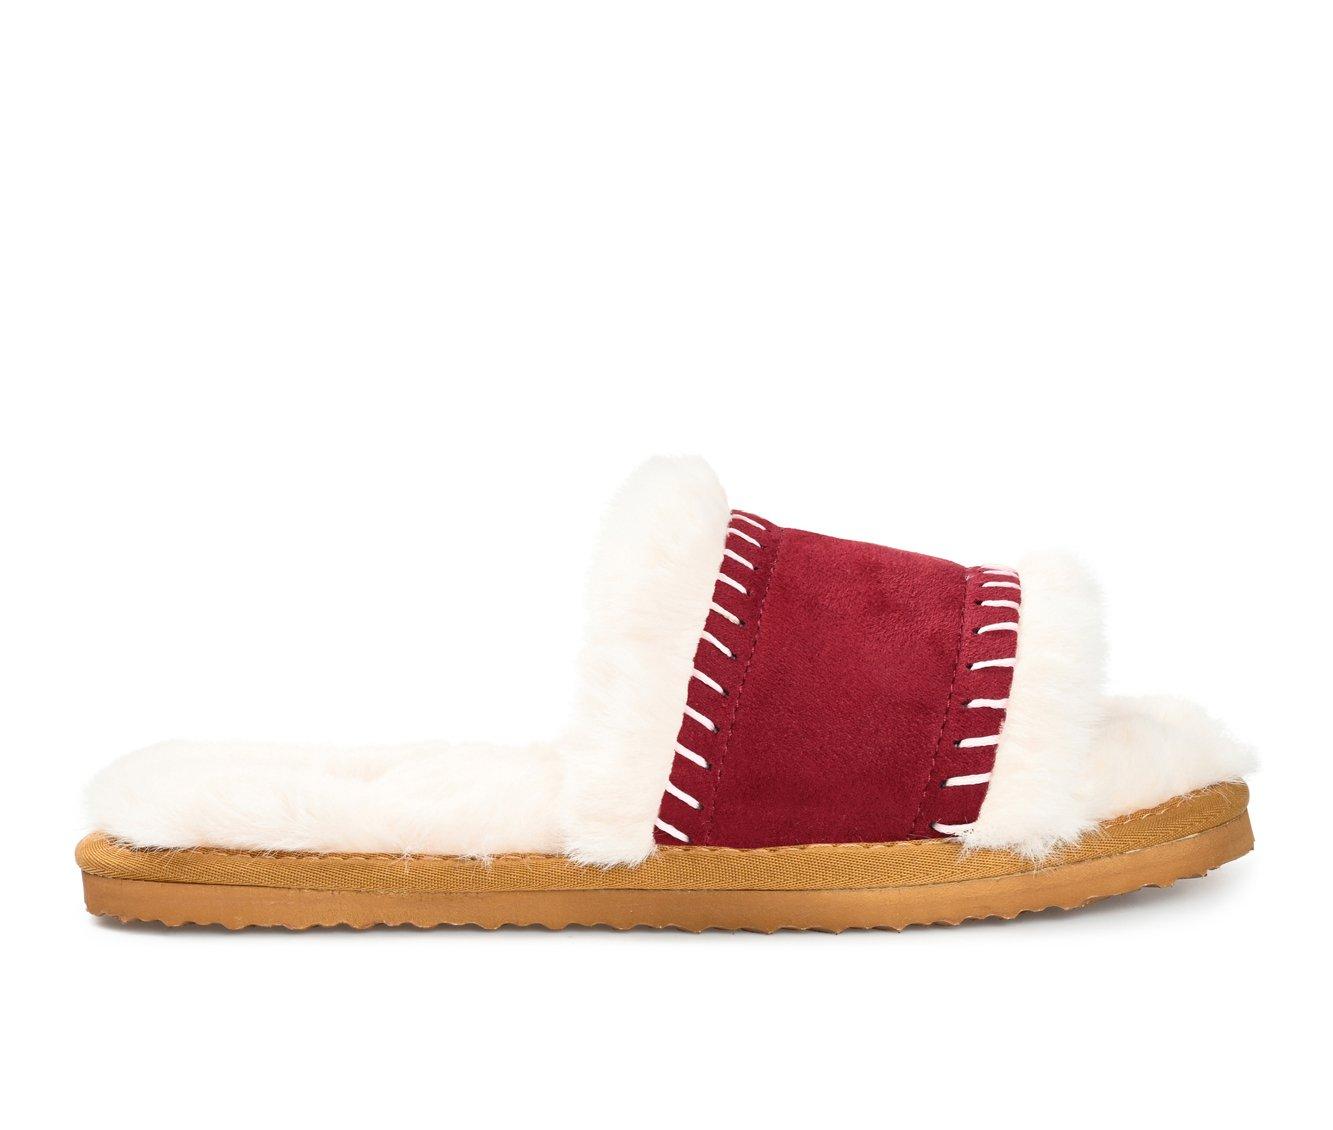 Journee Collection Mardie Slippers